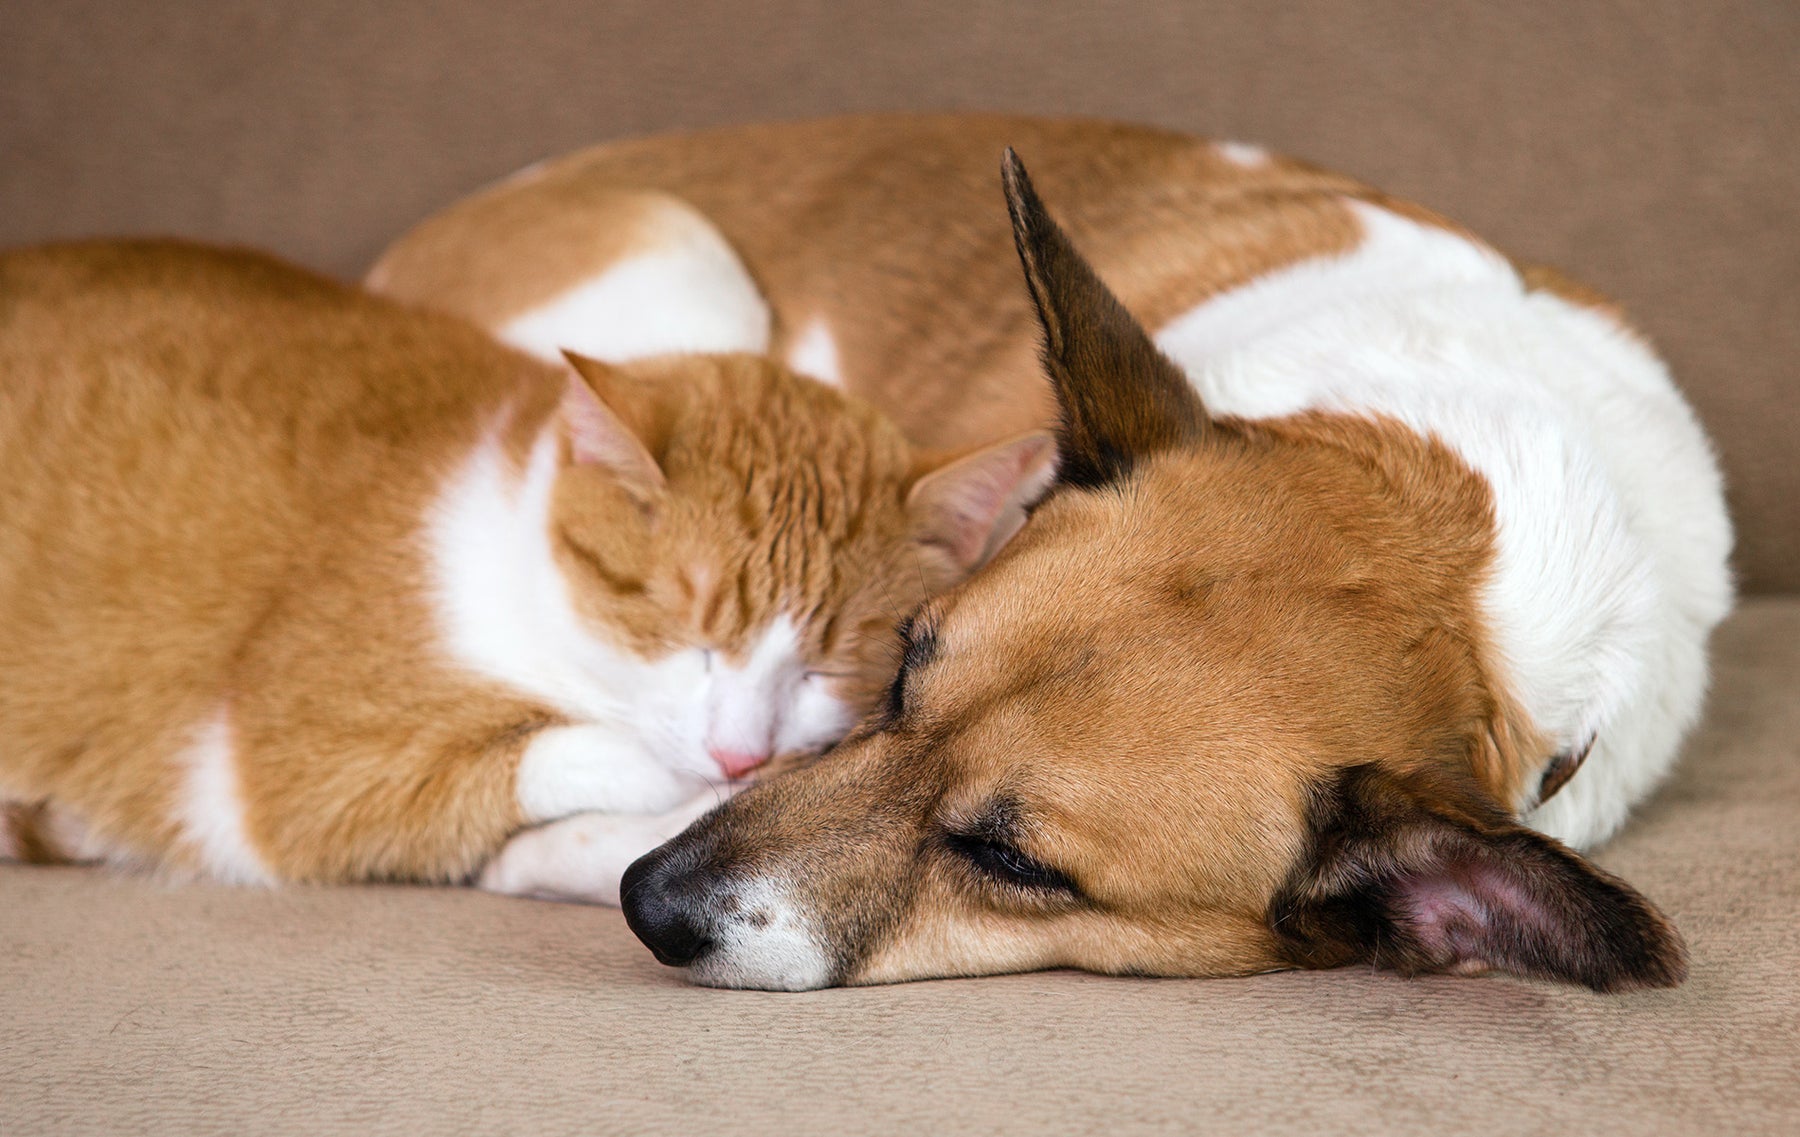 How Does Pet Remedy Work?